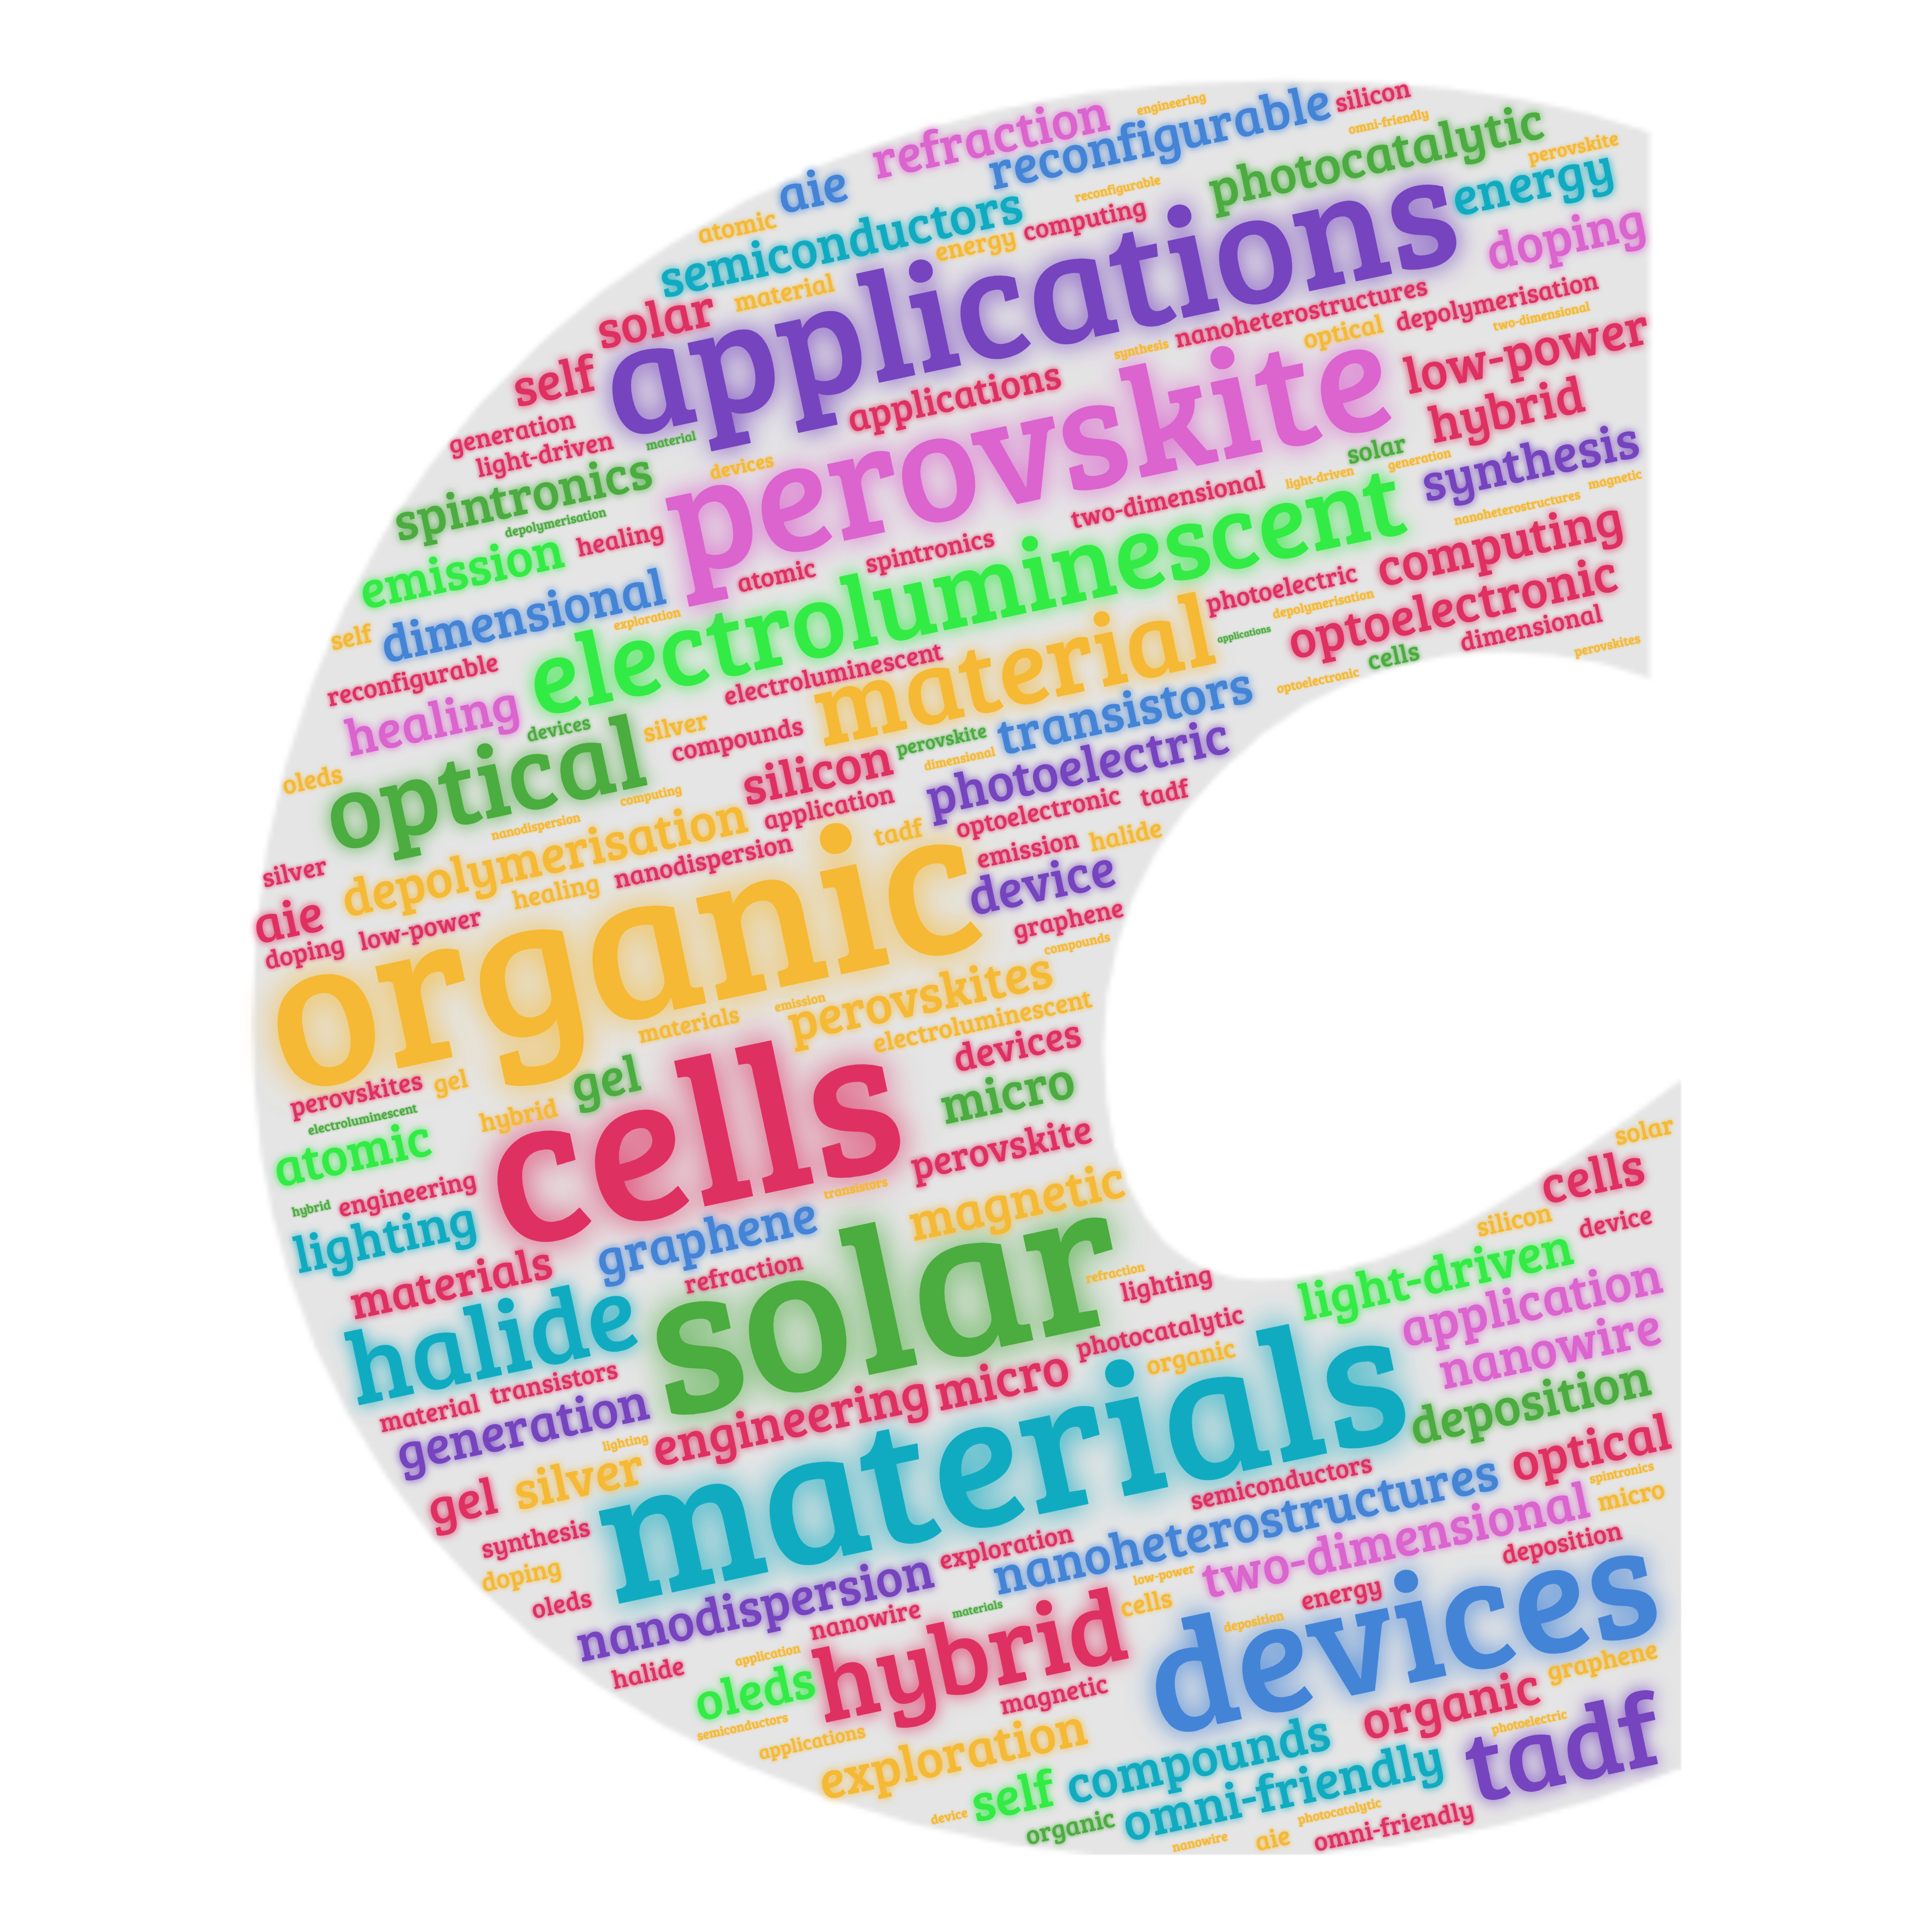 The letter 'C' filled with words from survey responses. Cells, Solar, Materials, Devices, Applications, Perovskite, Hybrid, Halide, Optical, Organic, Electroluminescence.